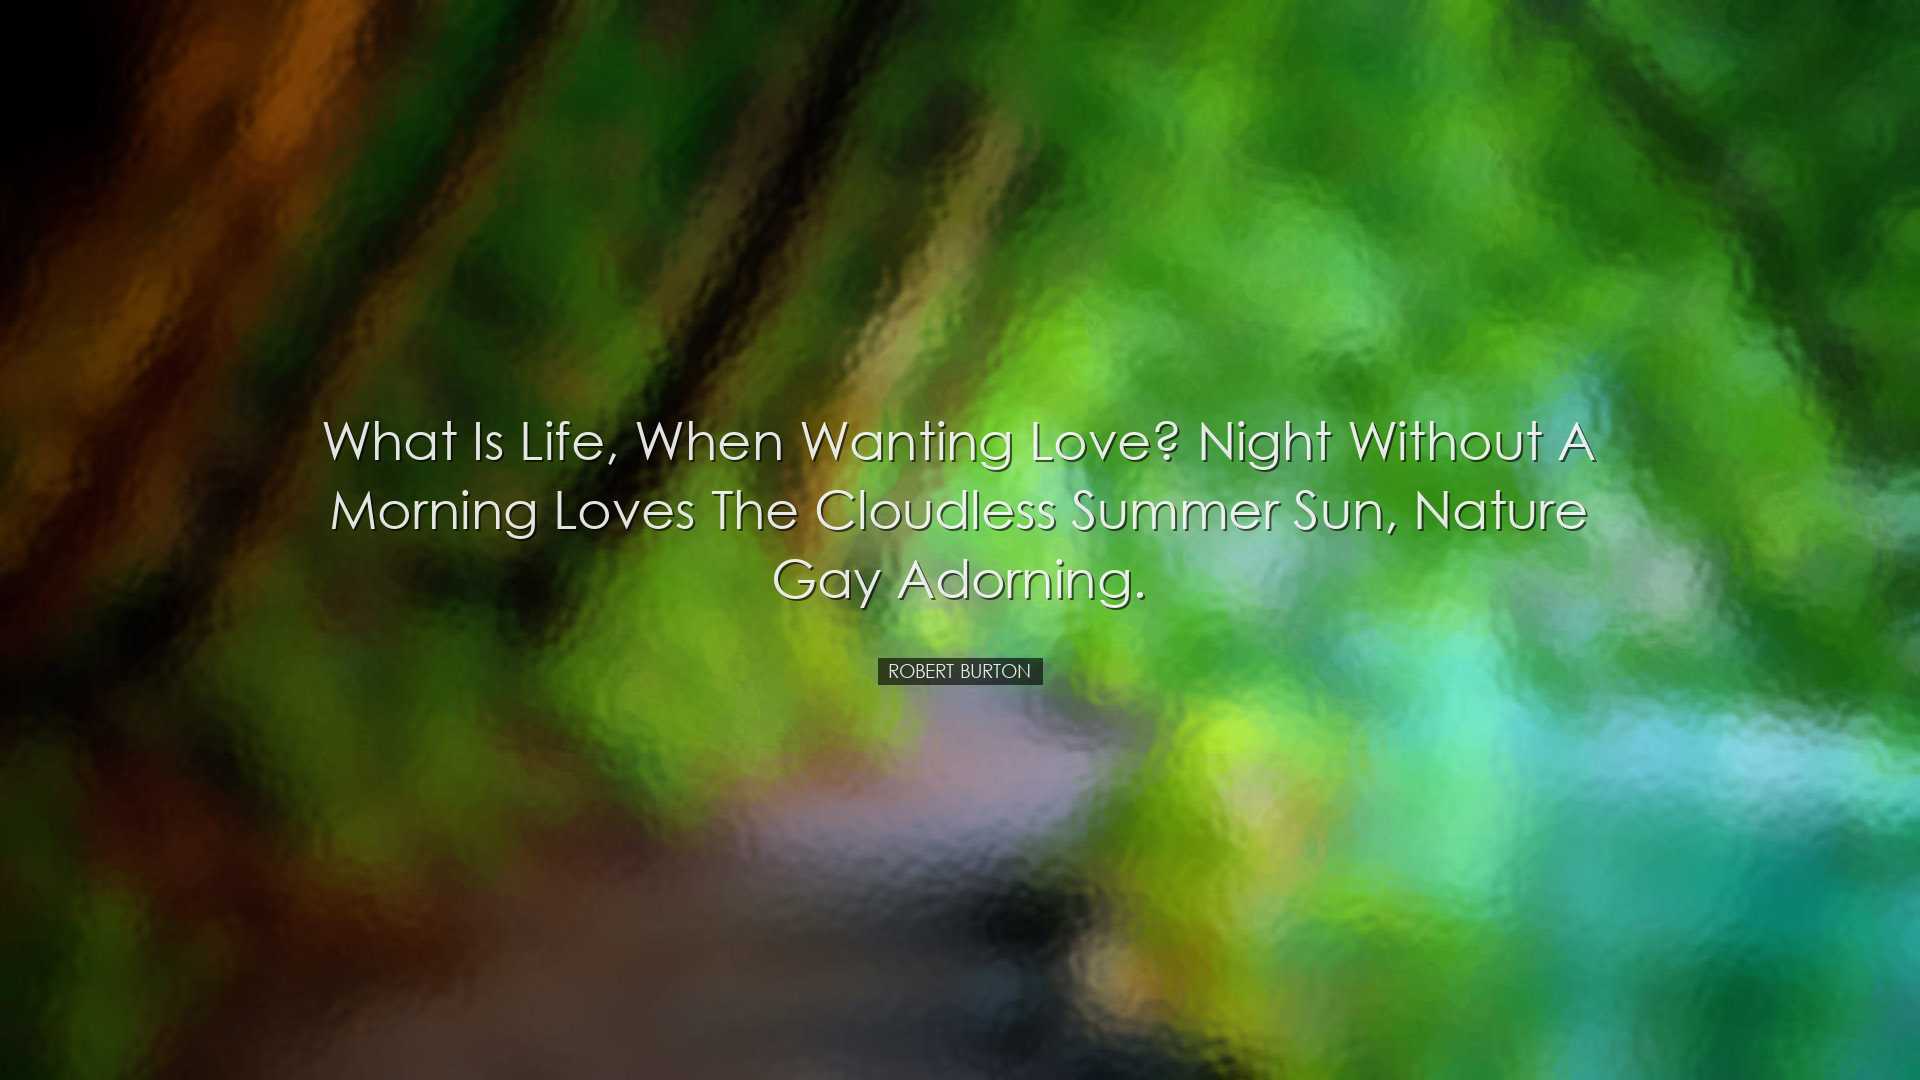 What is life, when wanting love? Night without a morning loves the